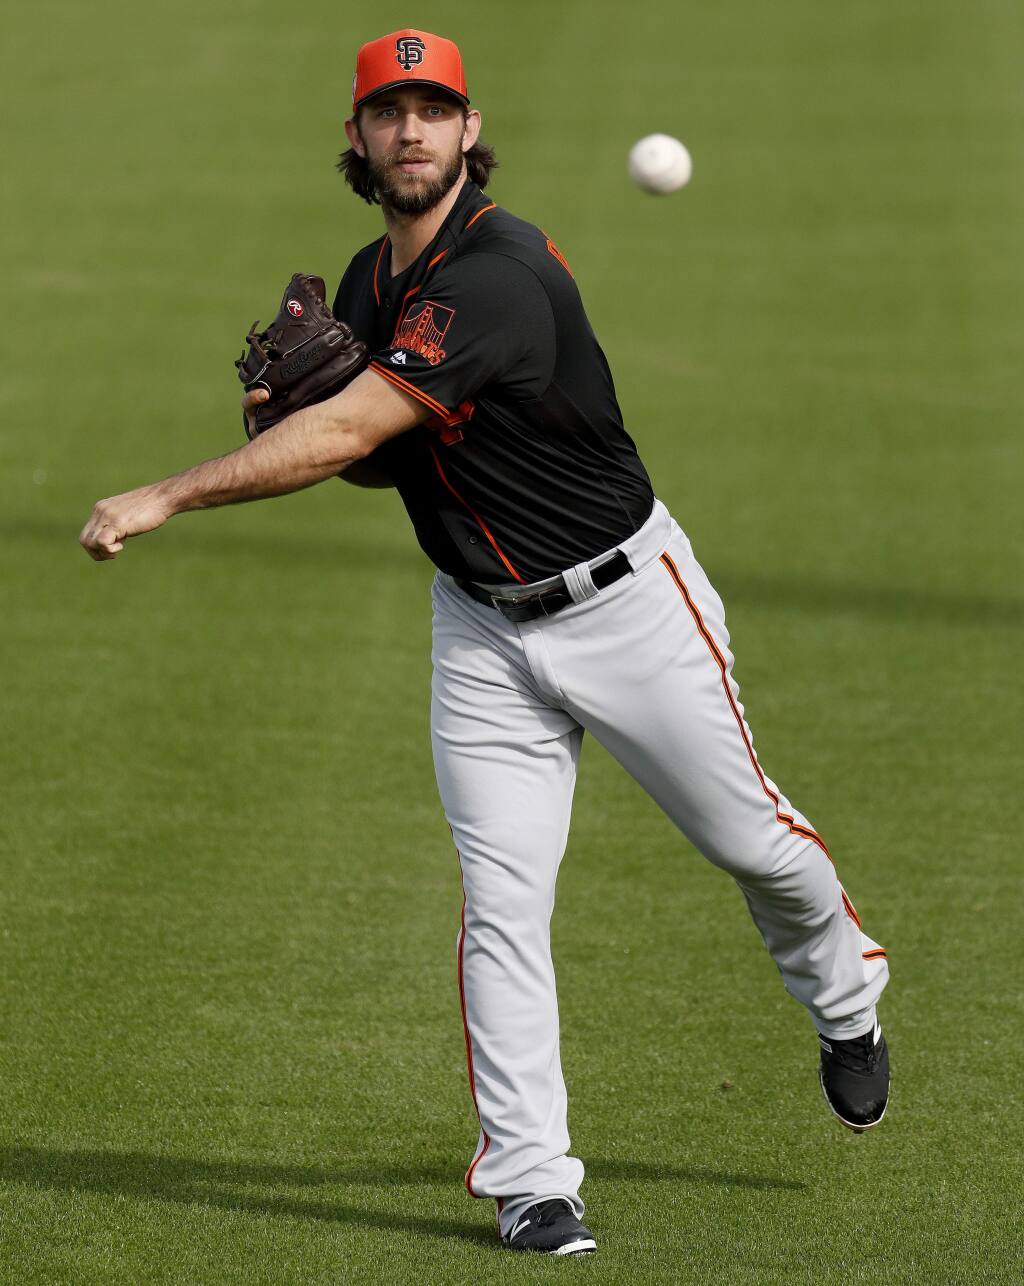 AP Male Athlete of the Year: Giants' Bumgarner Had an MVP Year